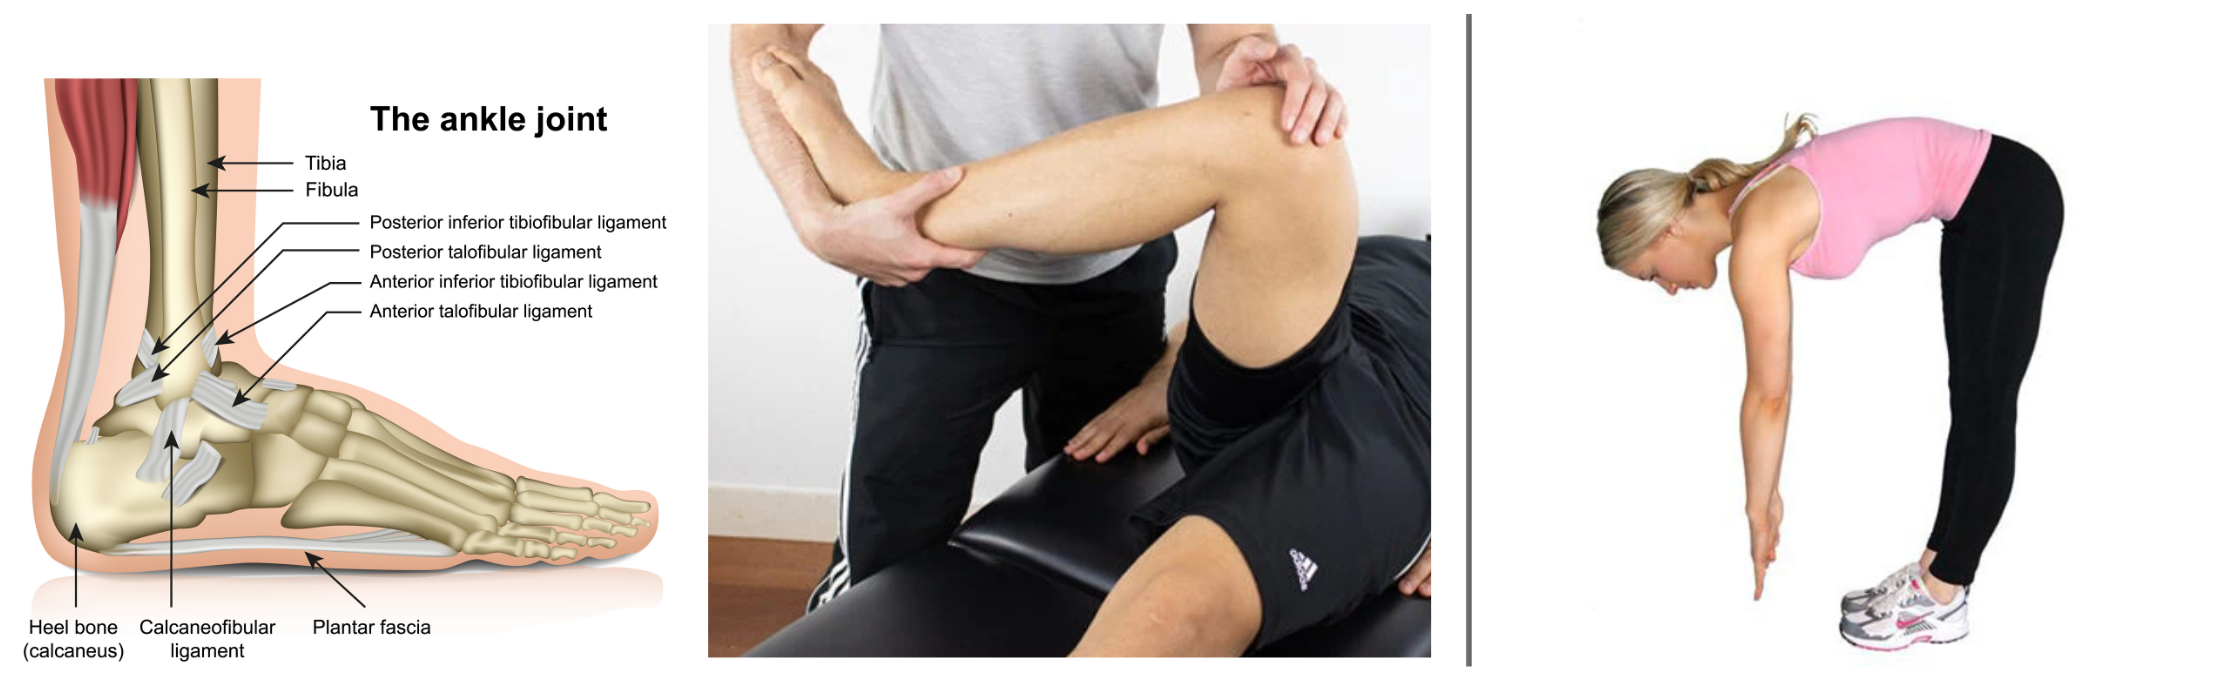 Physical assessment of foot, ankle, knee, hip & back